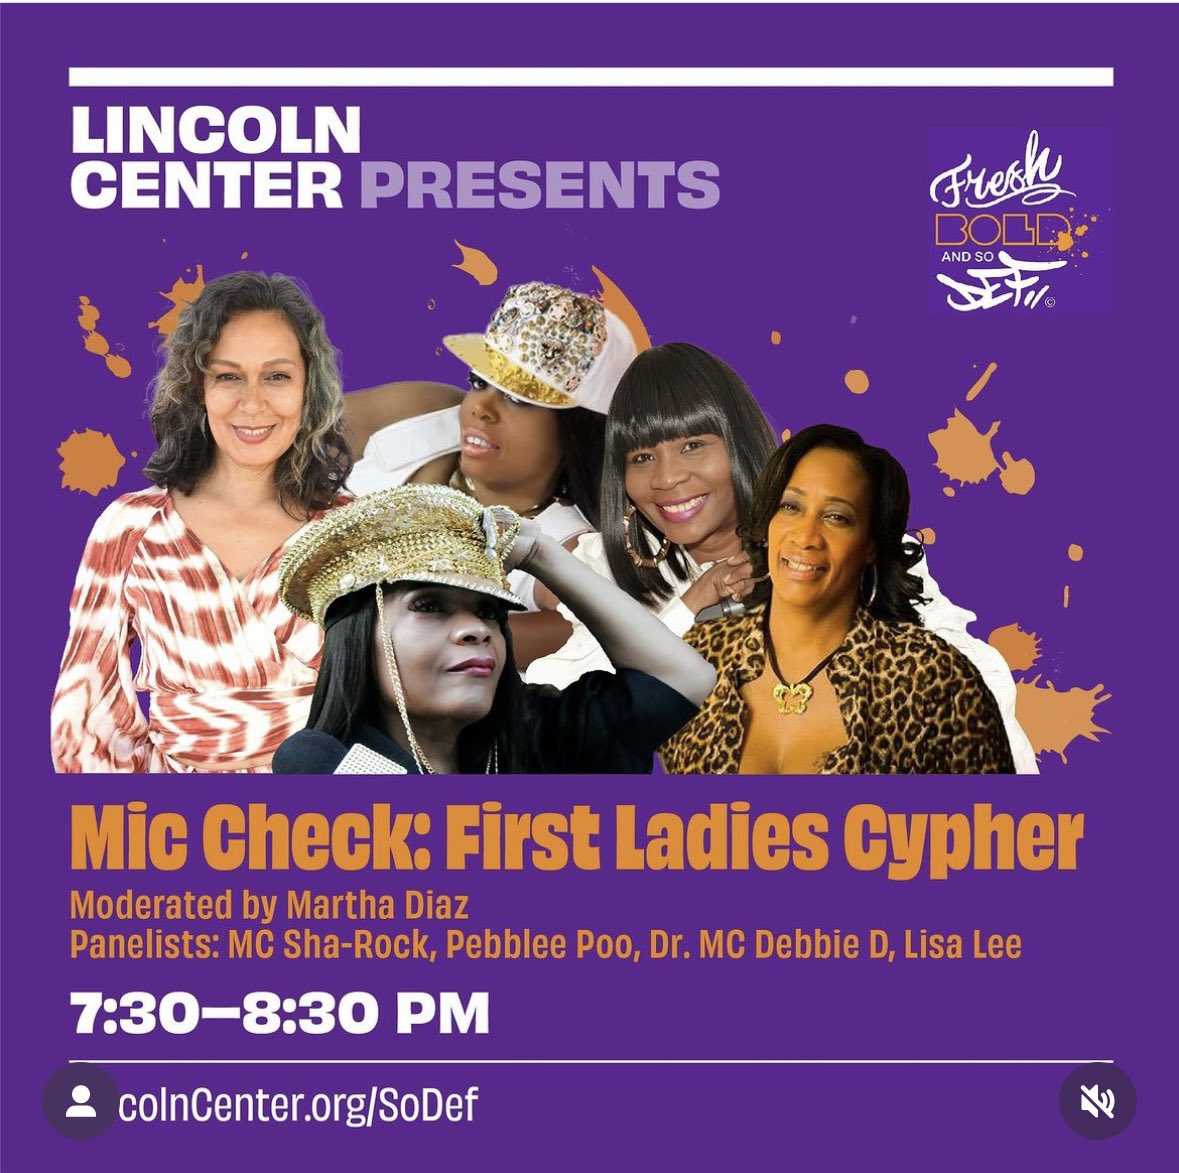 April 5. Lincoln Center. 👑 The Fresh, Bold and So Def is an all day event celebrating women in hip hop. At the 7:30 pm hour, the First Ladies Cypher begins! See you there! #mcdebbied #firstfemalemcsoloist #hiphopmatriarchs #ImAPioneer